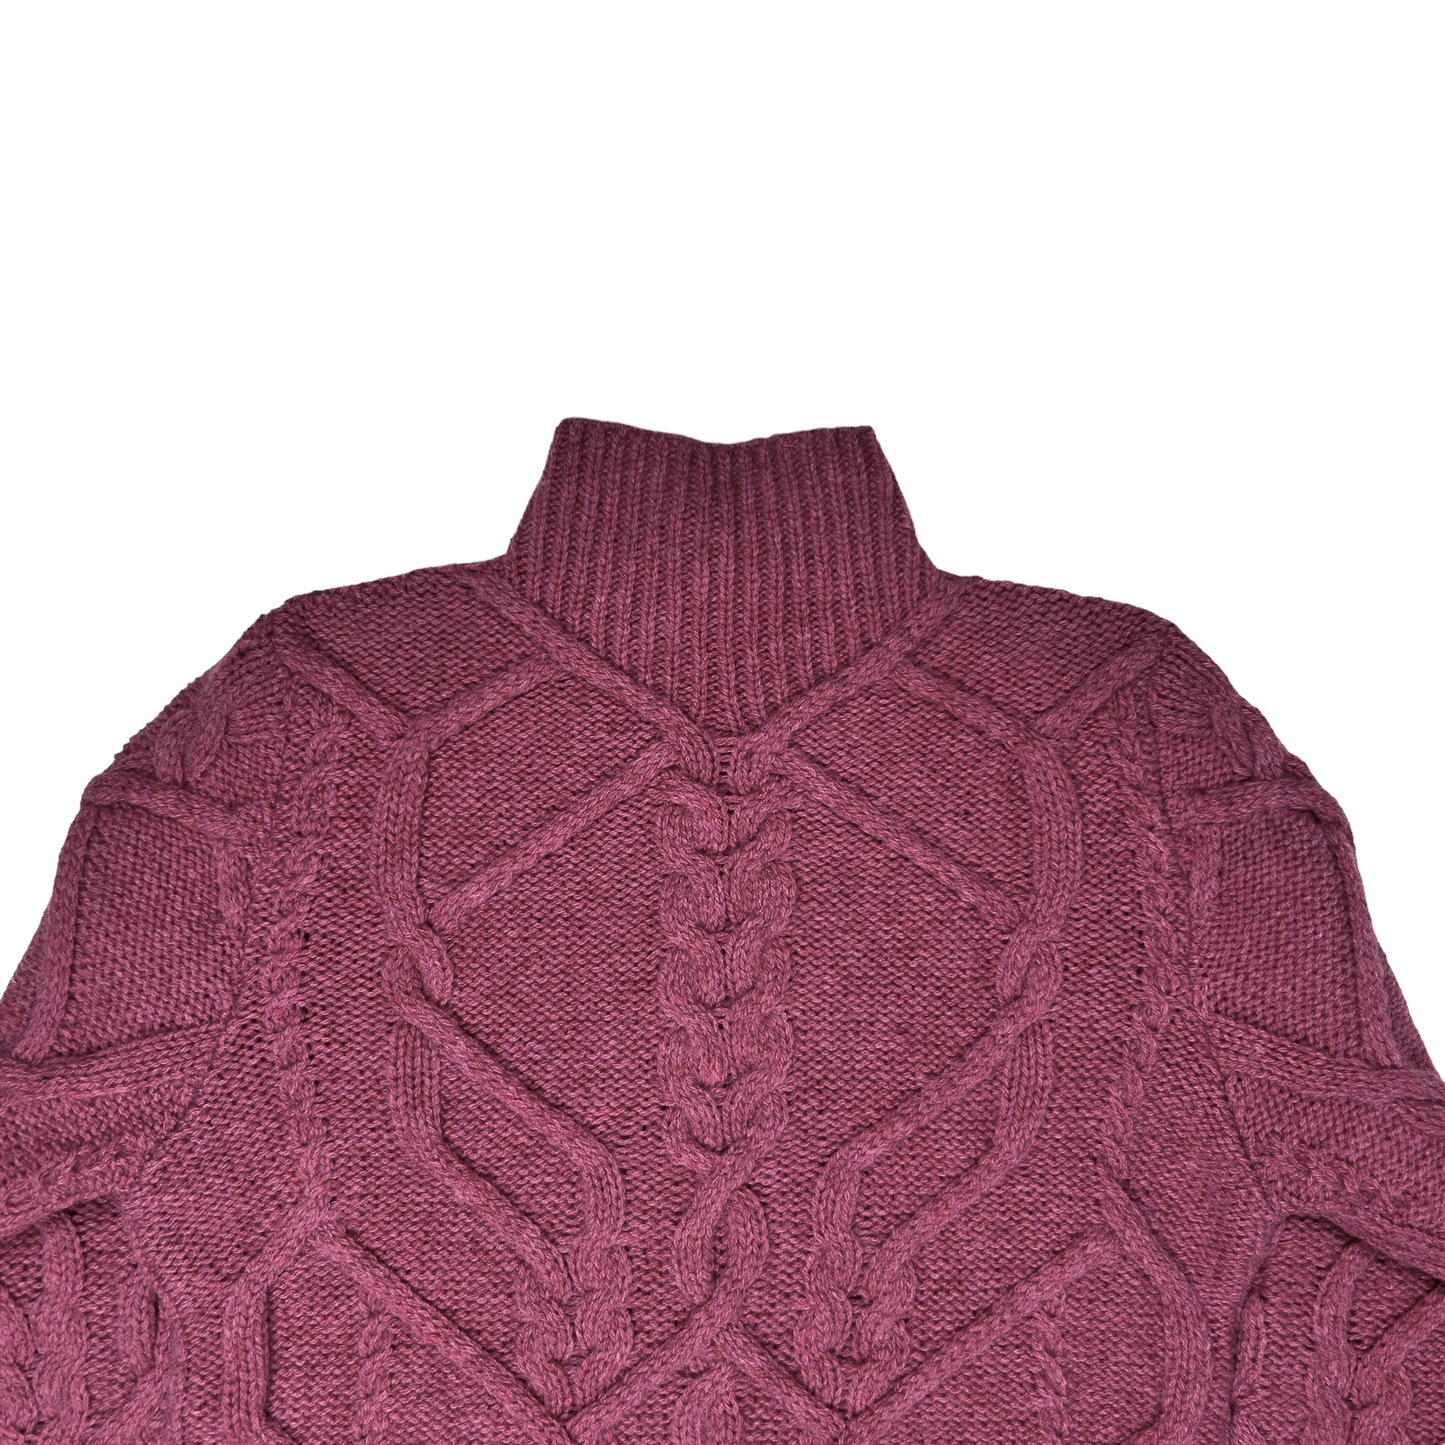 Dries Van Noten Cable Knit Mock Neck Sweater - AW21